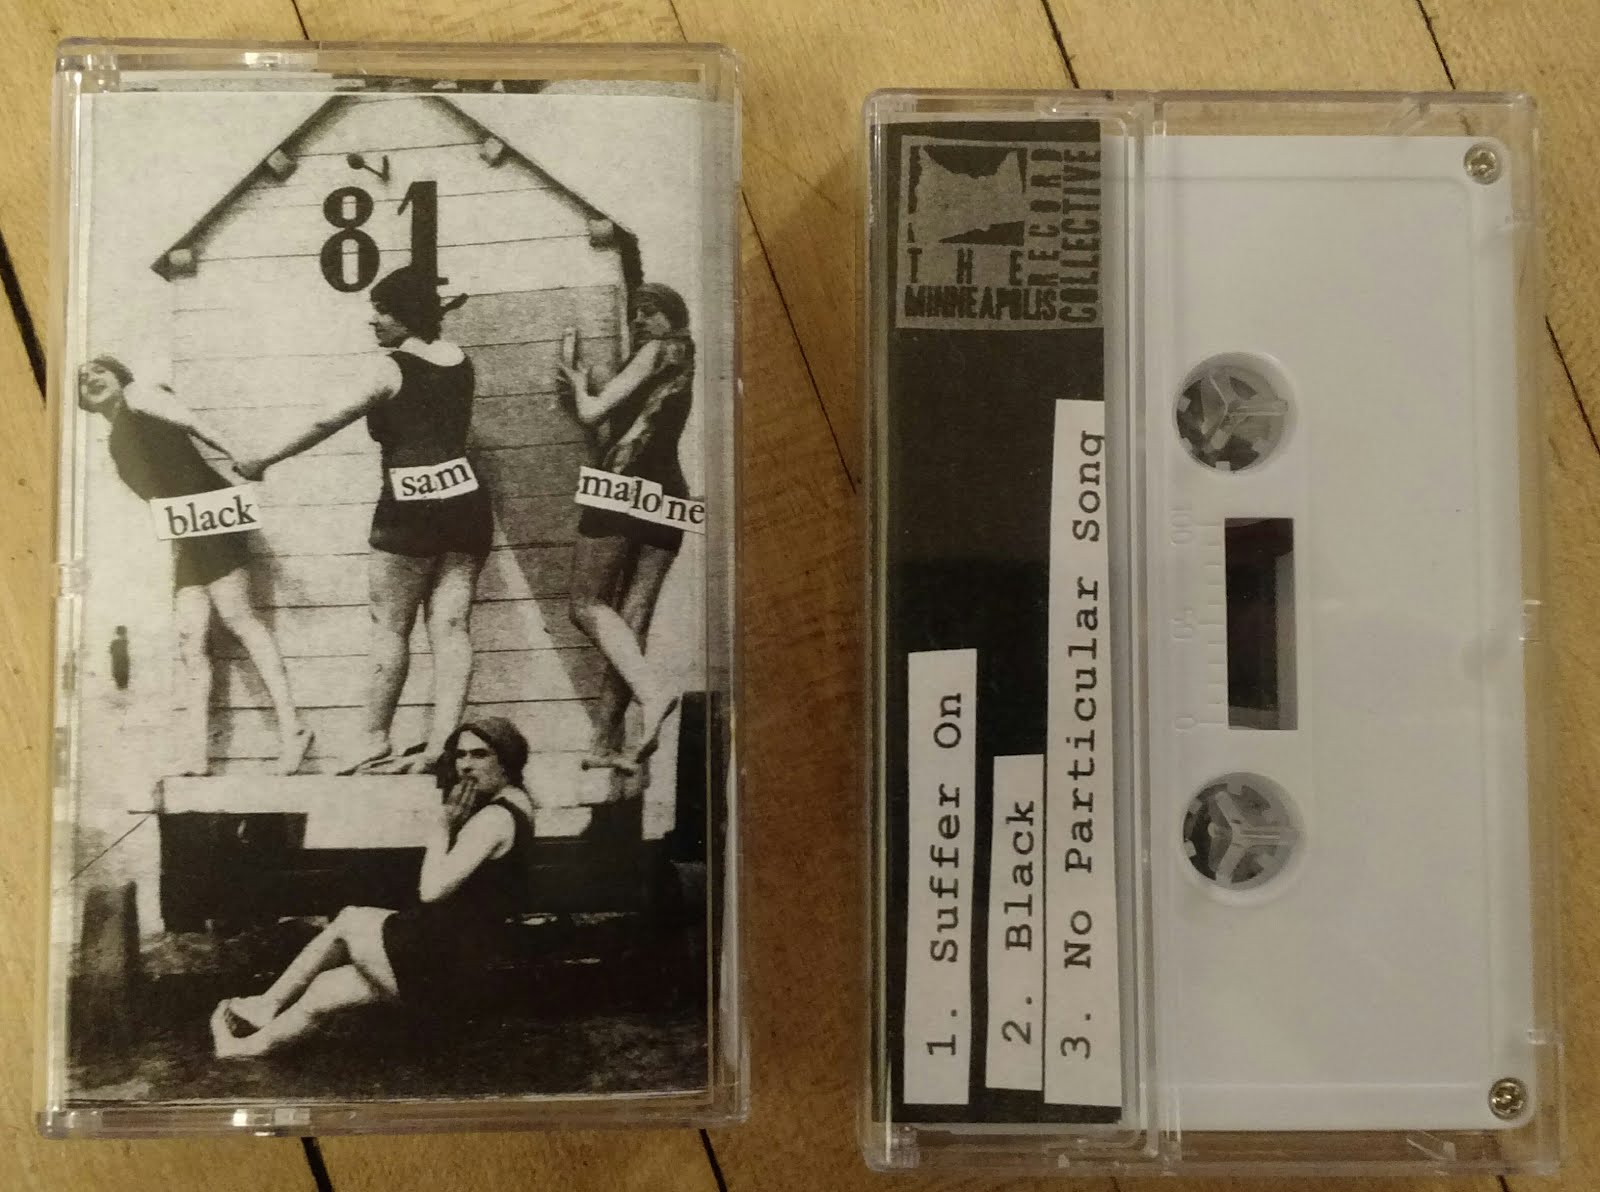 $3.50 - Our first release, "let's dance at the mouth of the pit", 3 song cassette